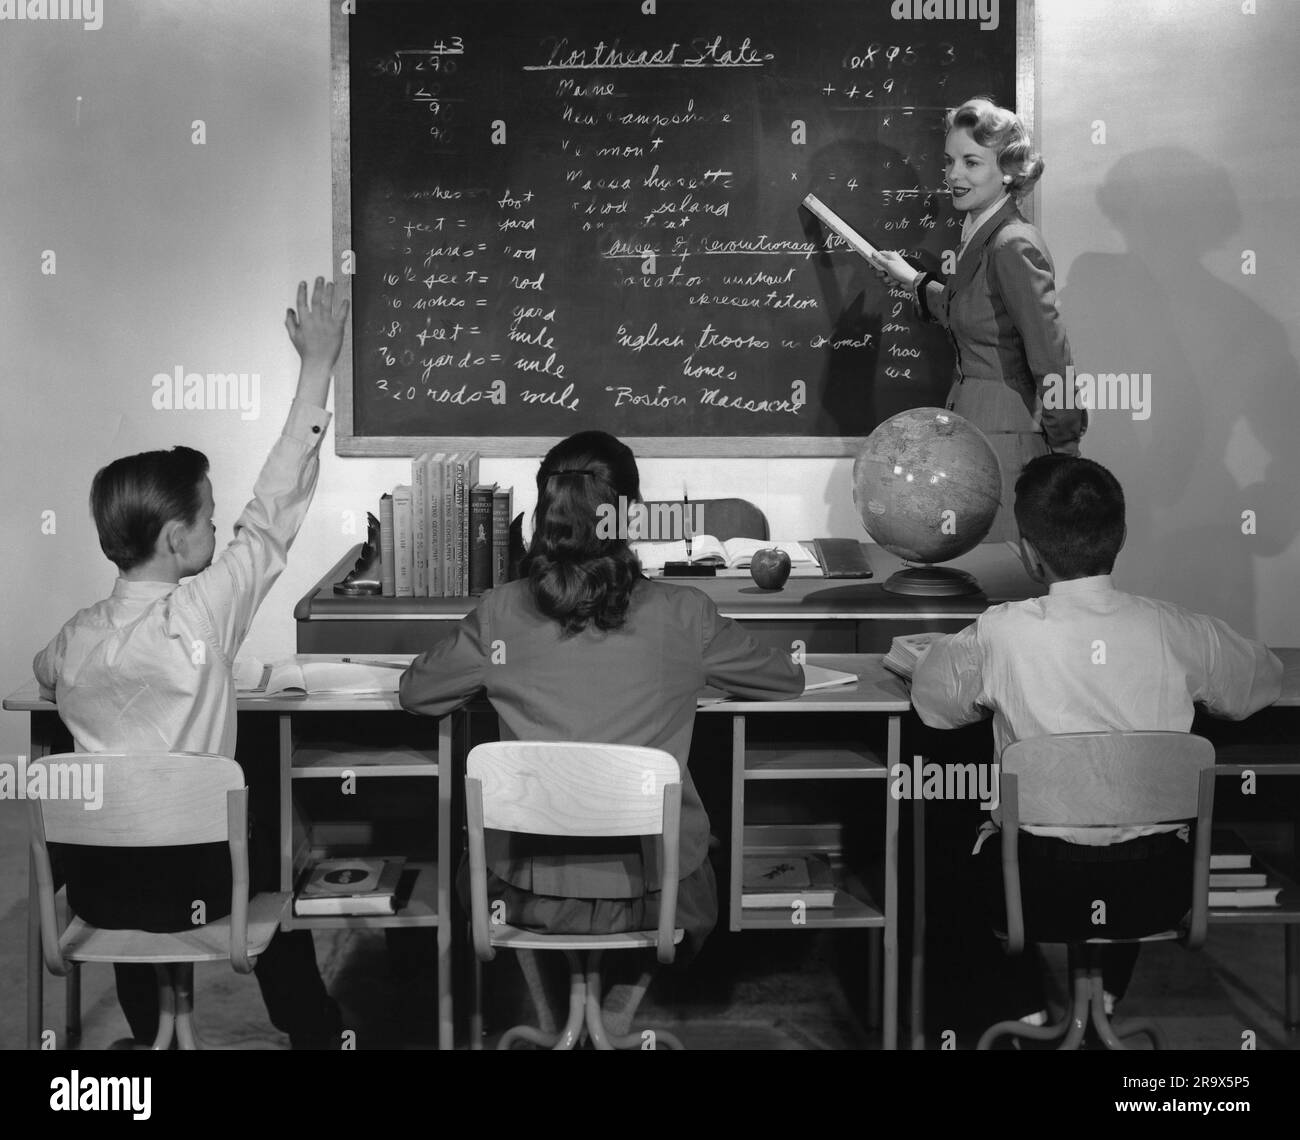 Female teacher standing at the blackboard pointing to writings using a rolled up document while one of three students sitting at their desks raises their hand to ask a question or answer a question Stock Photo